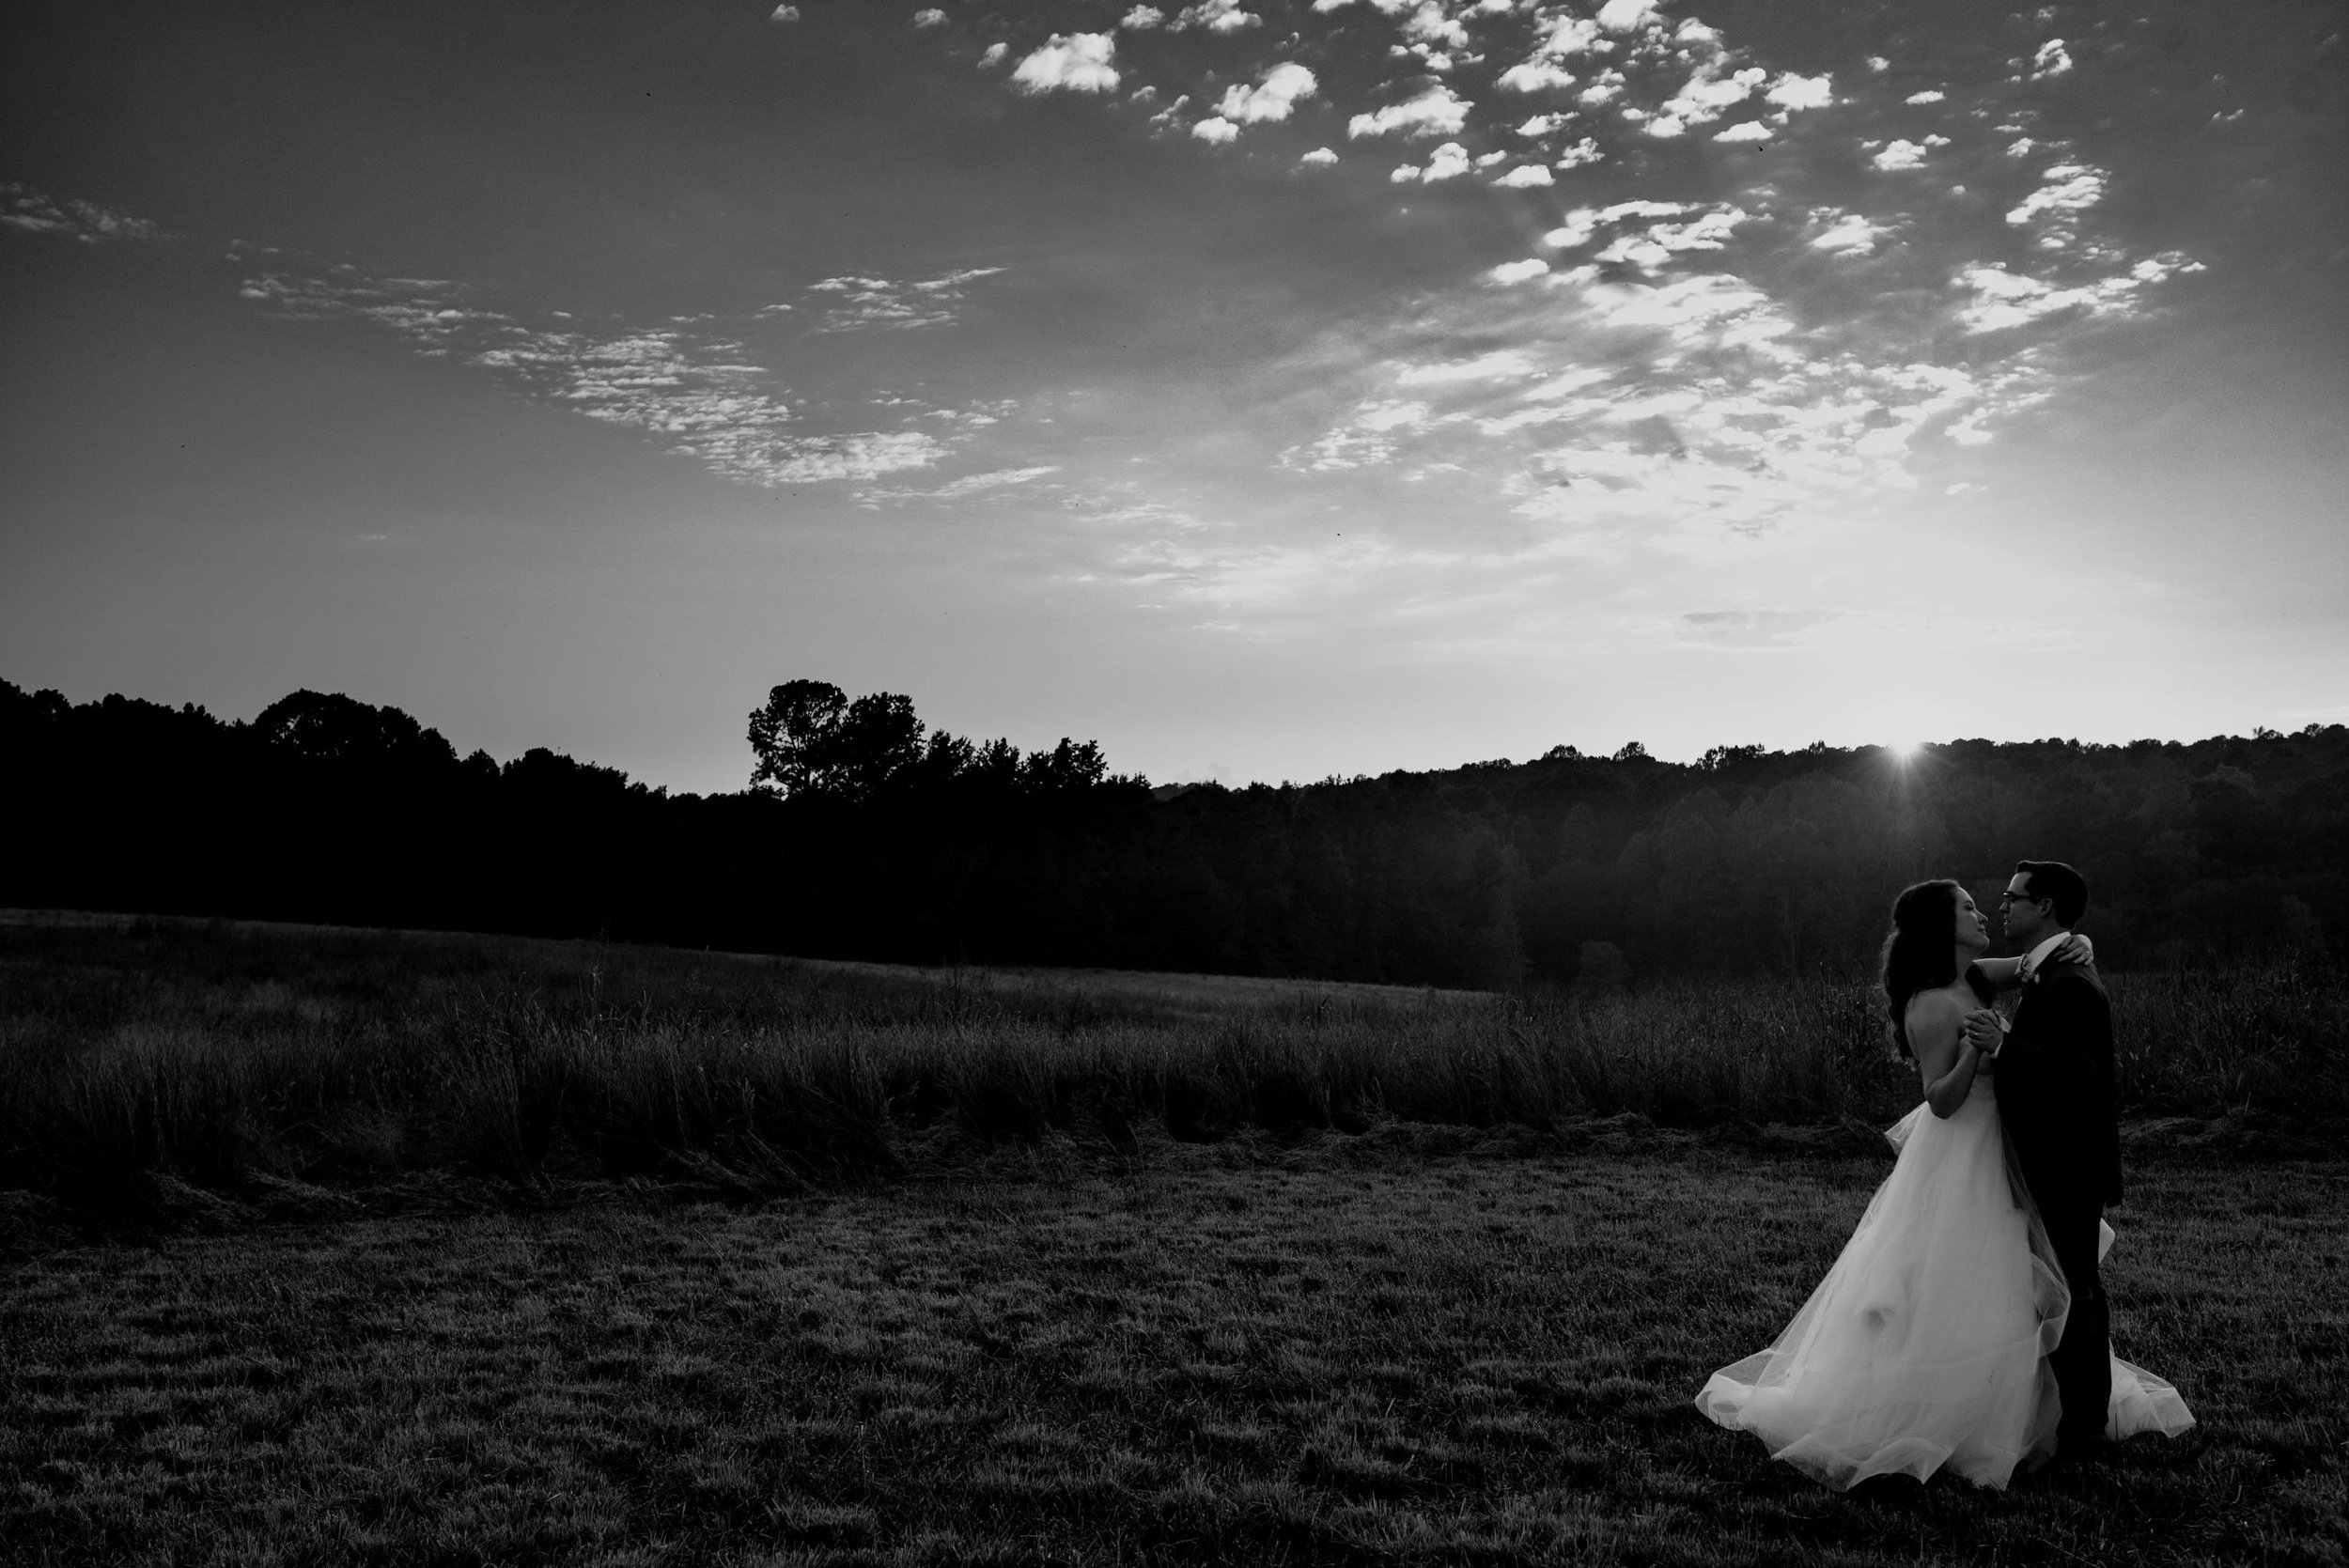 black and white photo of the bride and groom dancing in the sunset in a field during their wedding